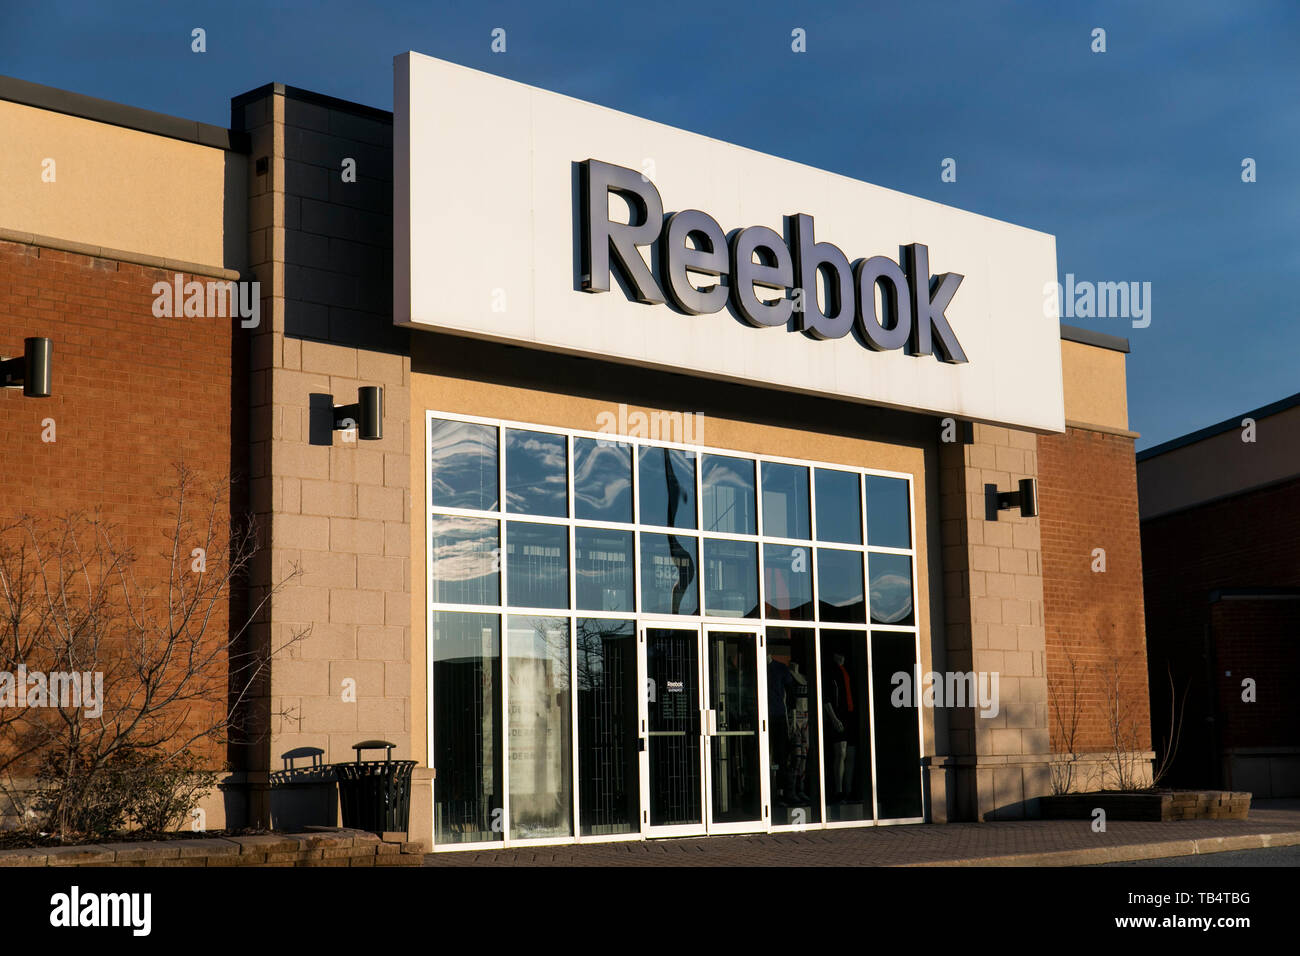 reebok stores in canada